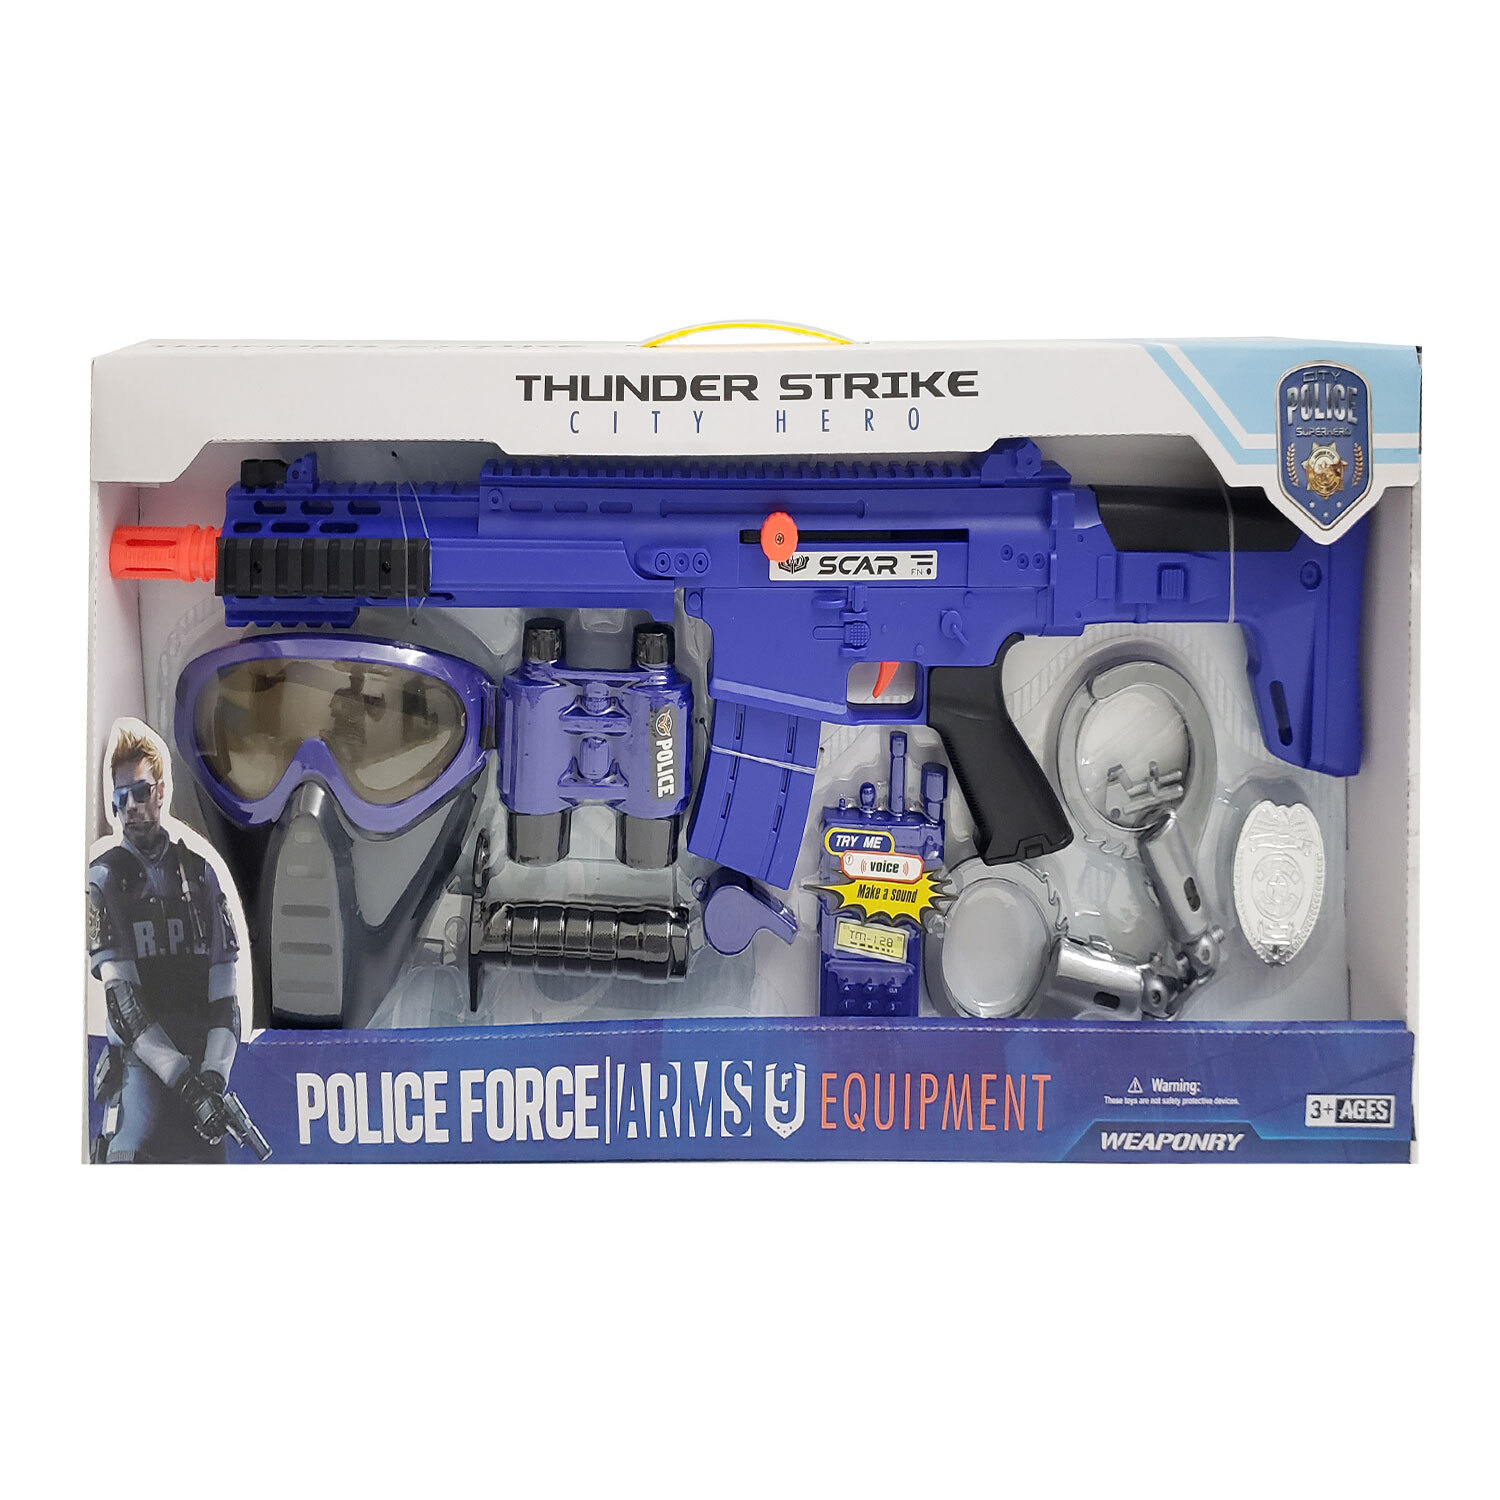 Thunder Strike Police Forms Arms Equipment Playset Image